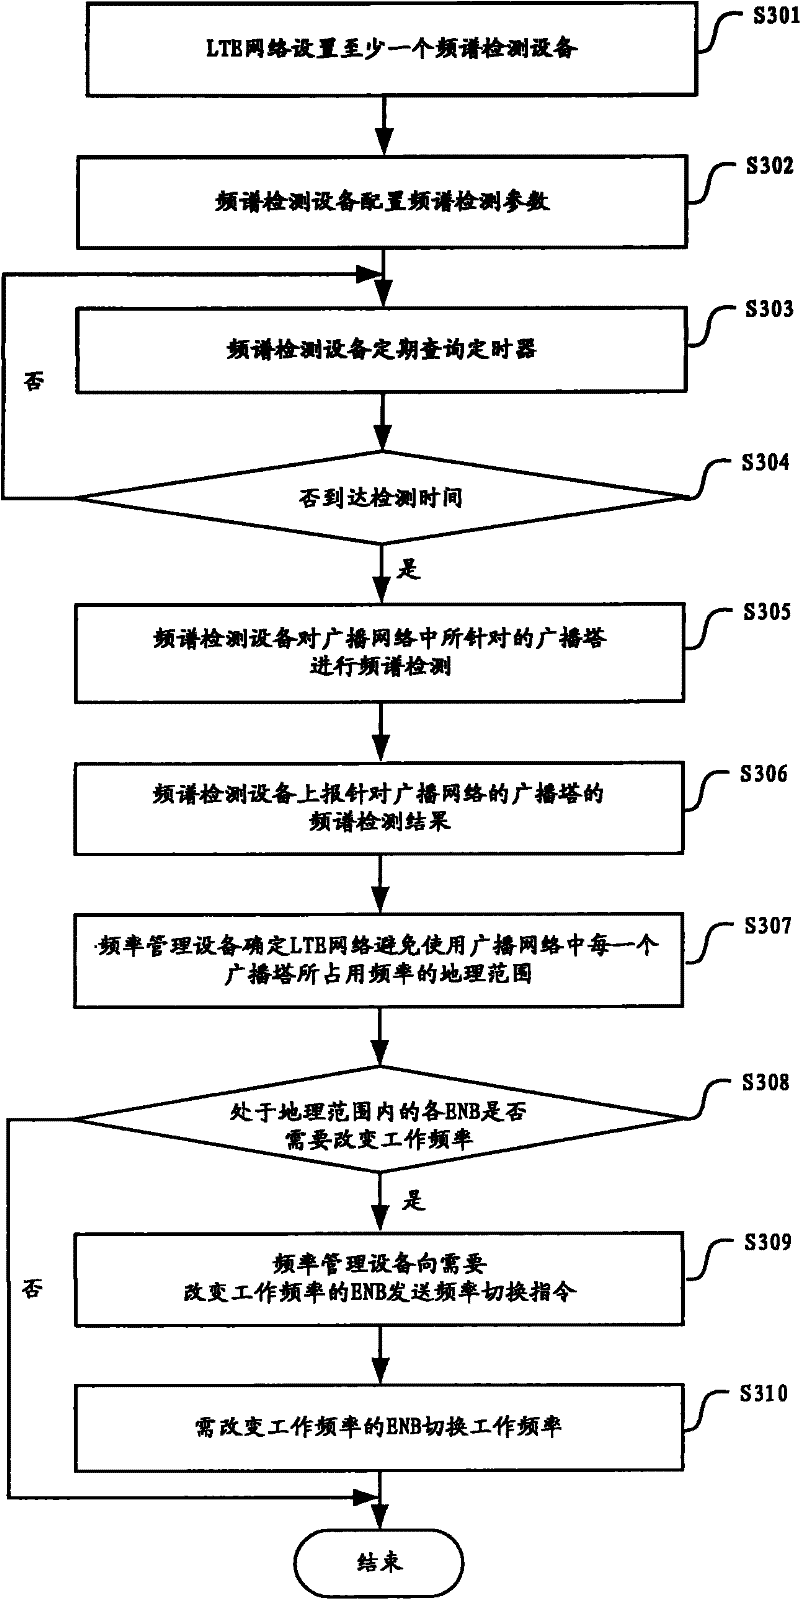 Frequency spectrum detection and frequency allocation system and method